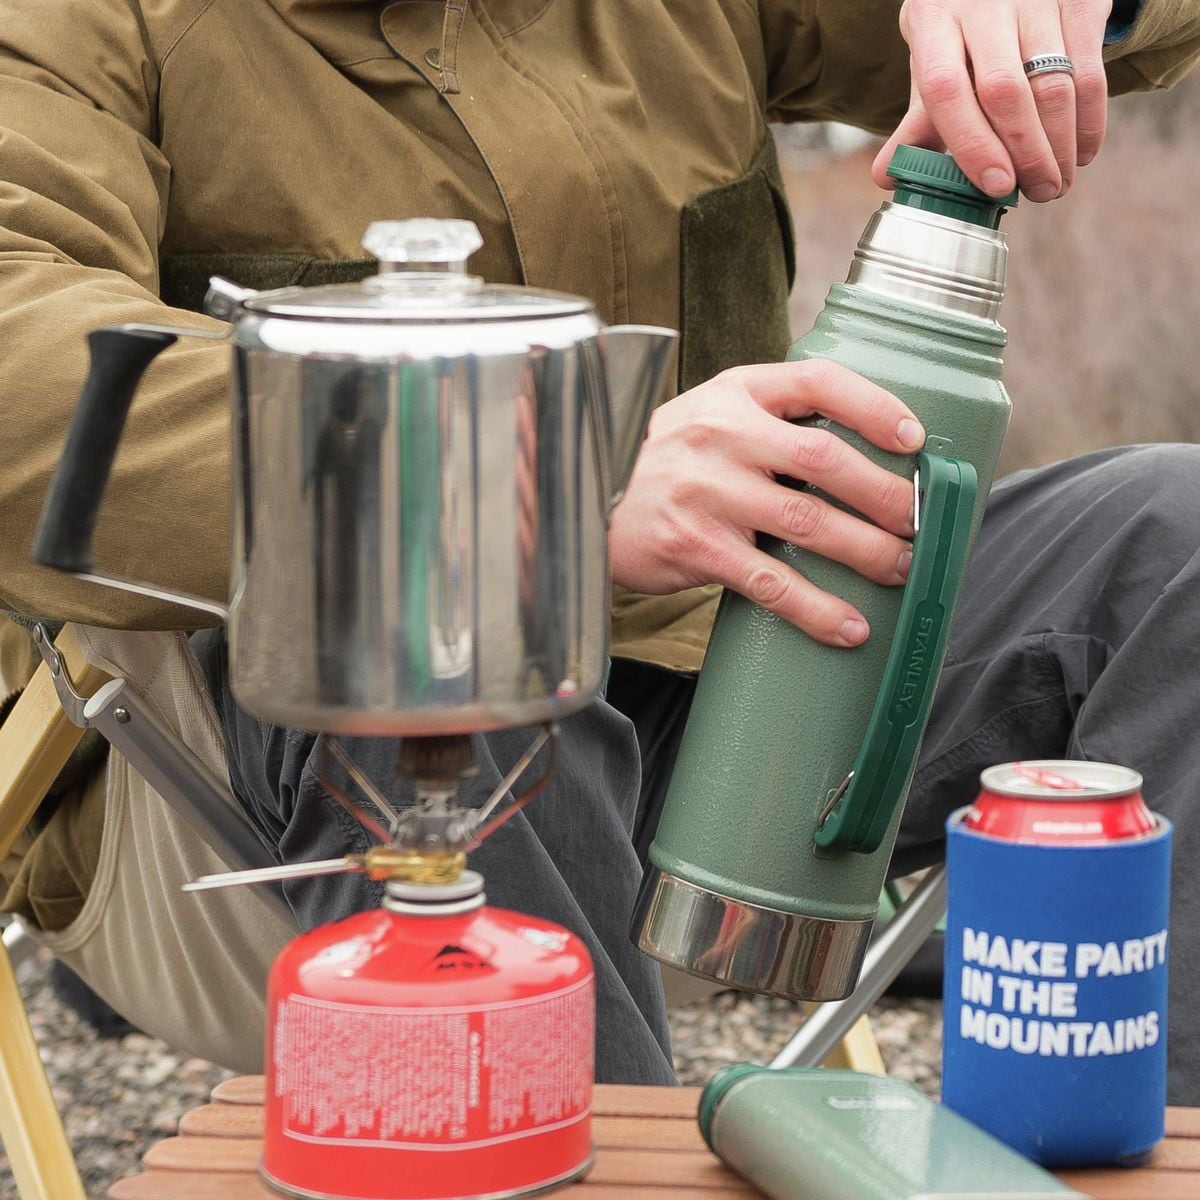 GSI Outdoors Glacier 3-Cup Percolator Review: I Bought & Tested It